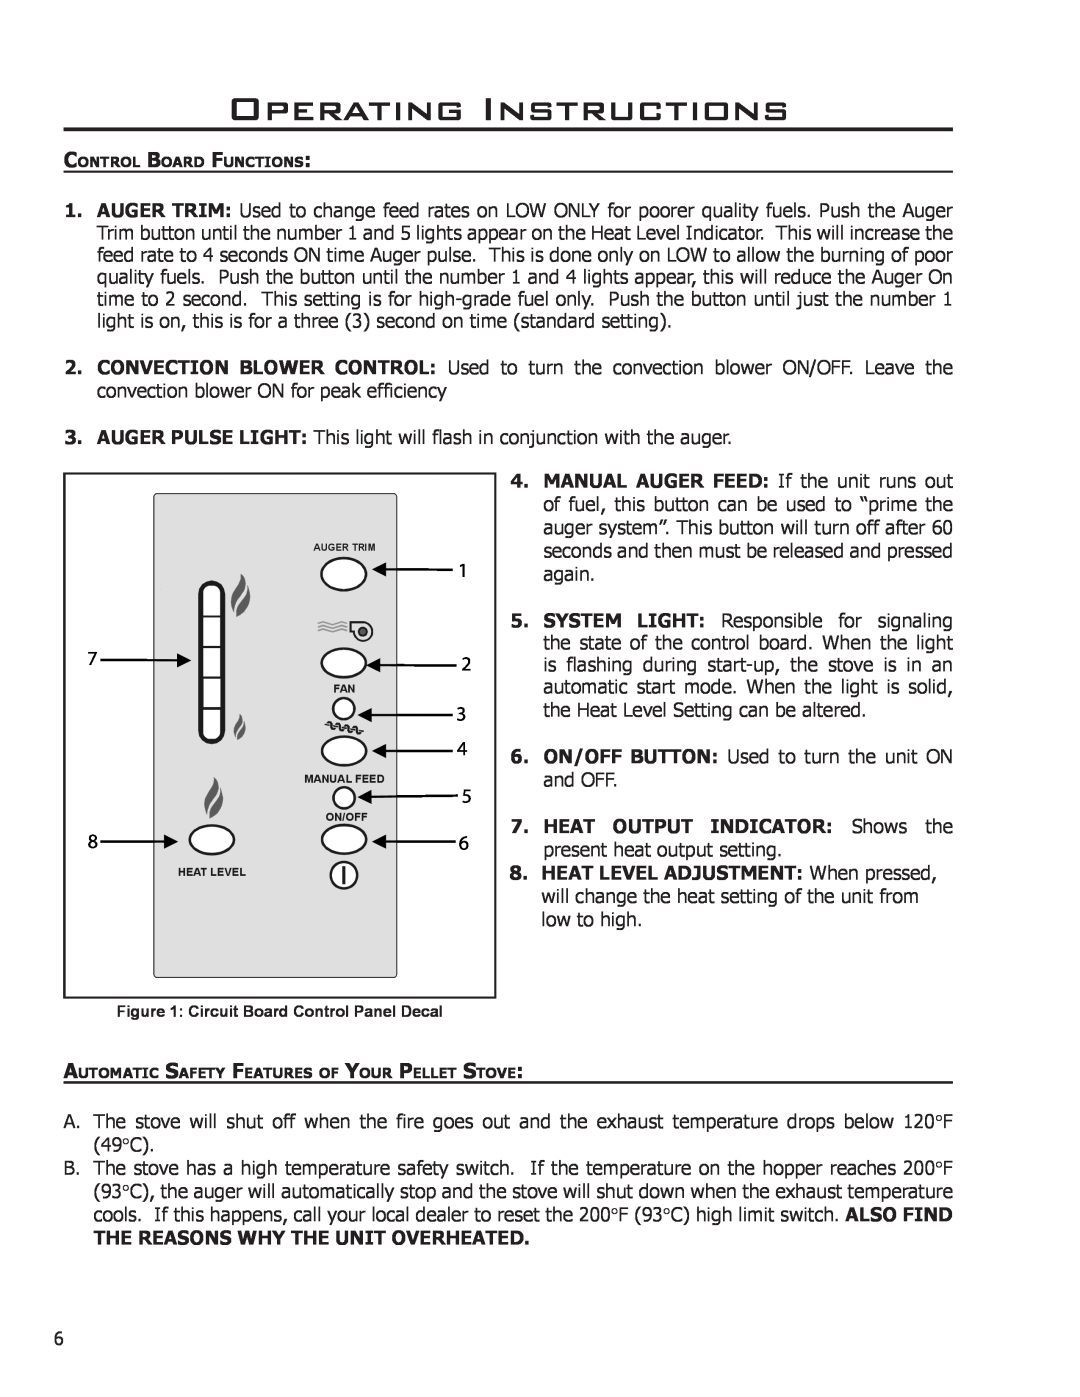 Enviro C-11023 owner manual Operating Instructions, HEAT OUTPUT INDICATOR Shows the present heat output setting 